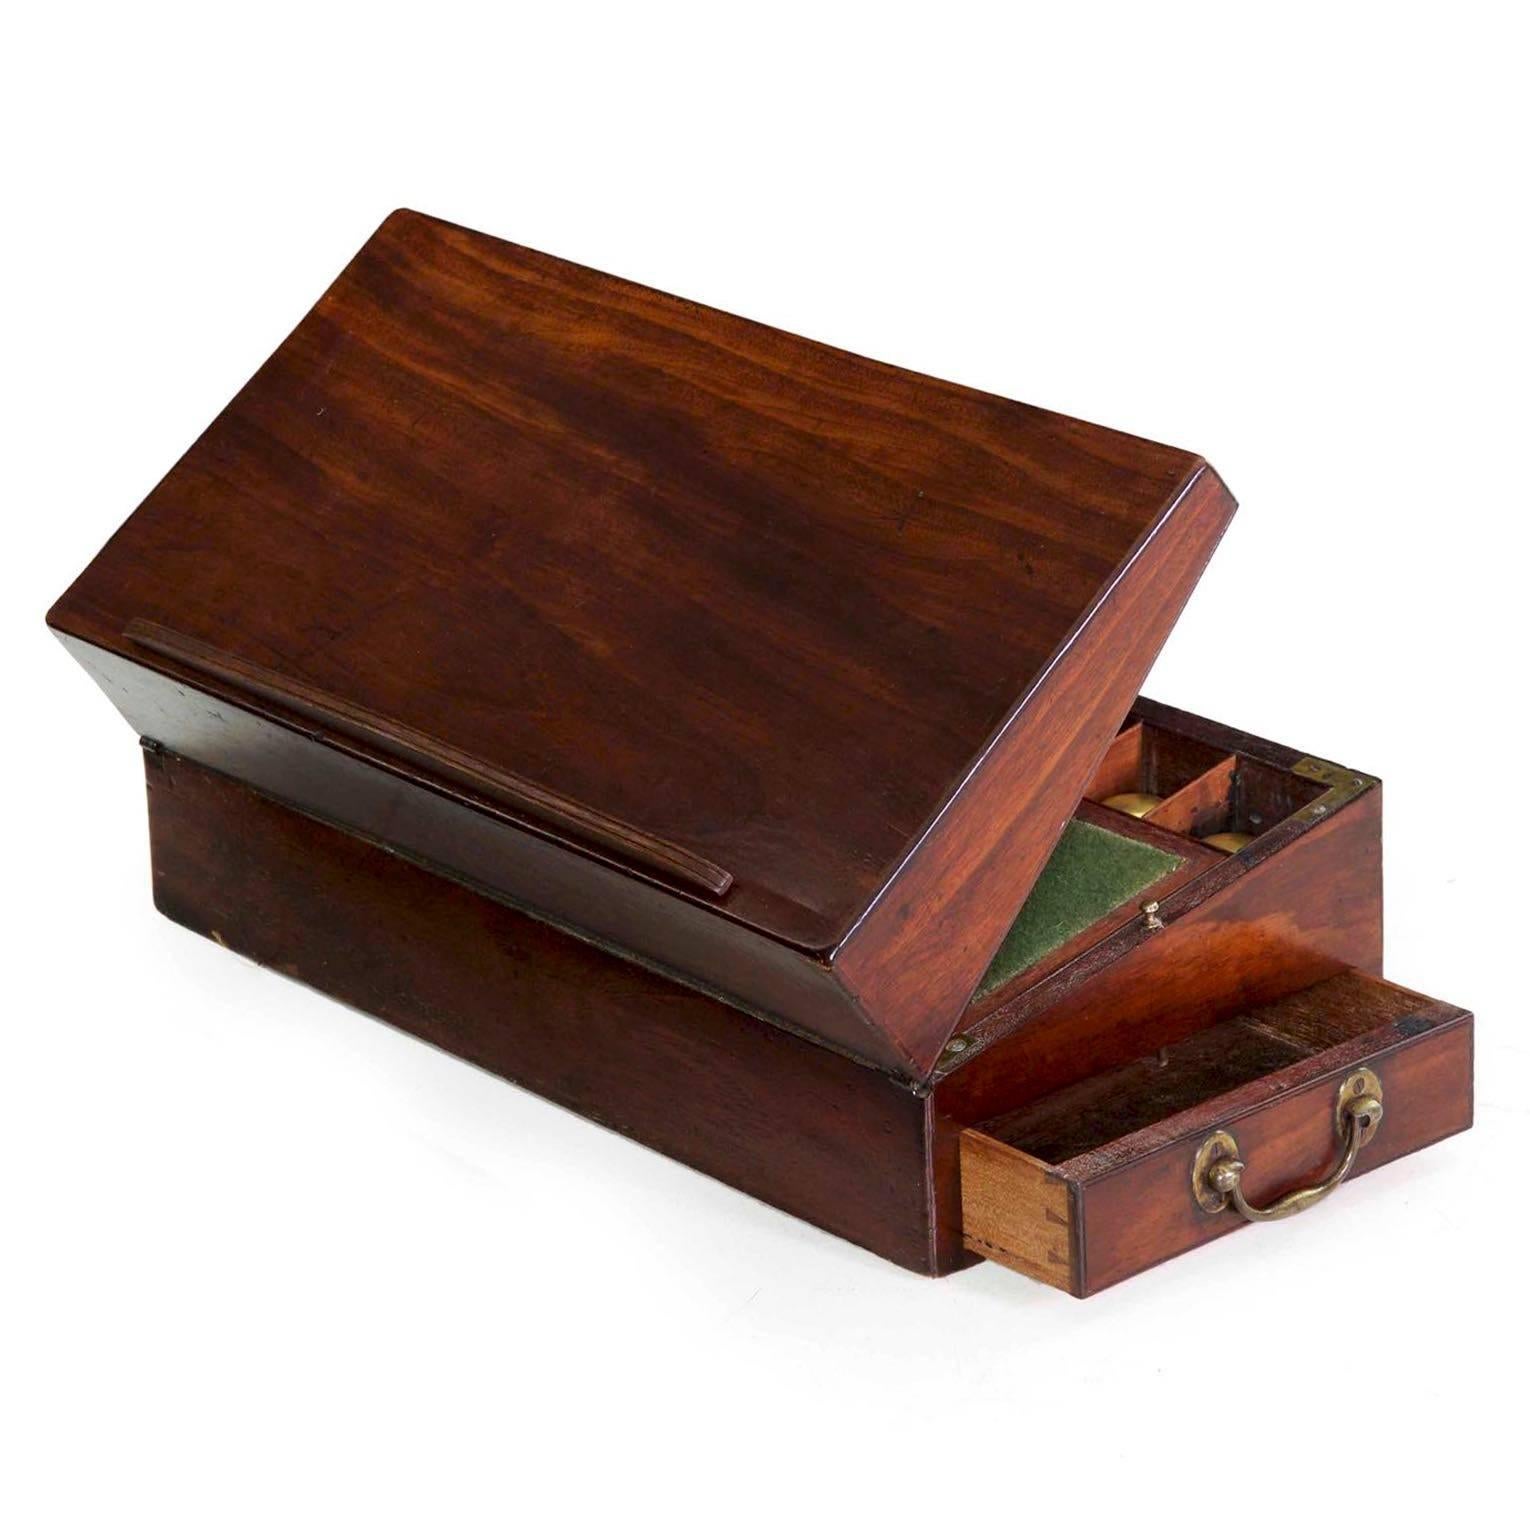 A rare find in this condition and with this degree of originality throughout, this fine mahogany writing slope is austere and simple in form. Original heavy brass carrying handles flank the box, one acting also as the draw for a small drawer; this